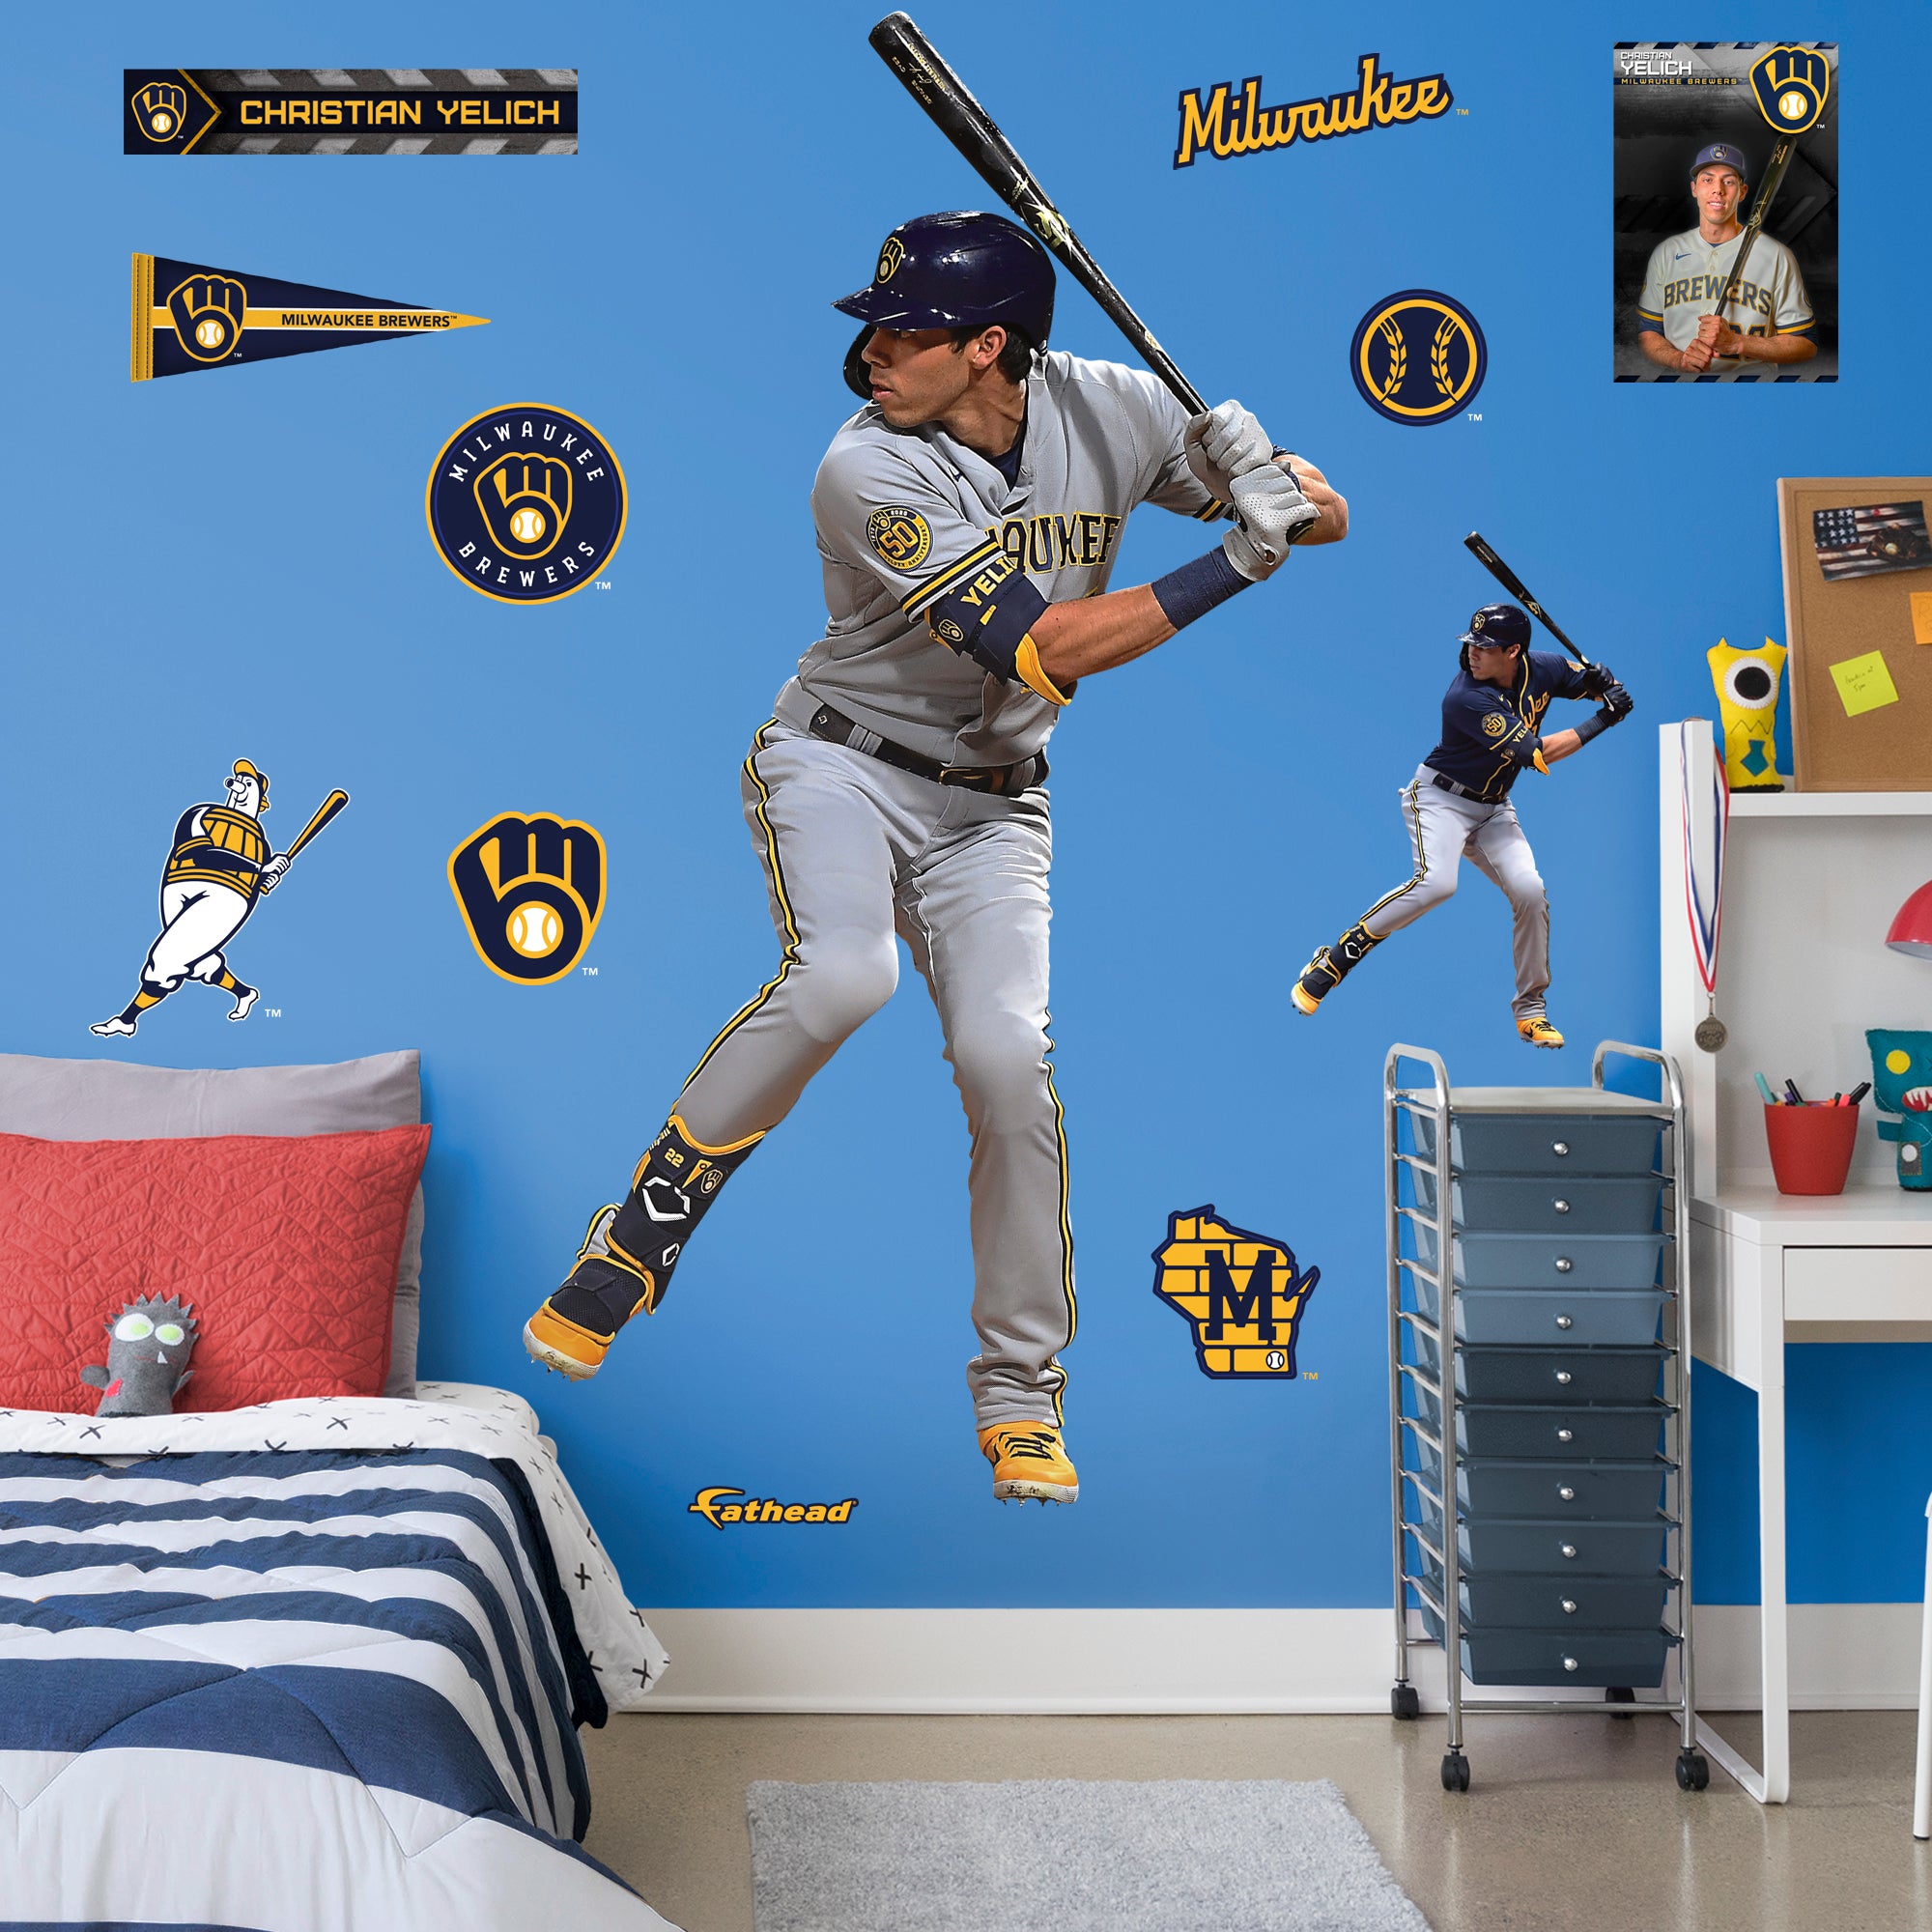 Christian Yelich for Milwaukee Brewers: RealBig Officially Licensed MLB Removable Wall Decal Life-Size Athlete + 11 Decals (41.5